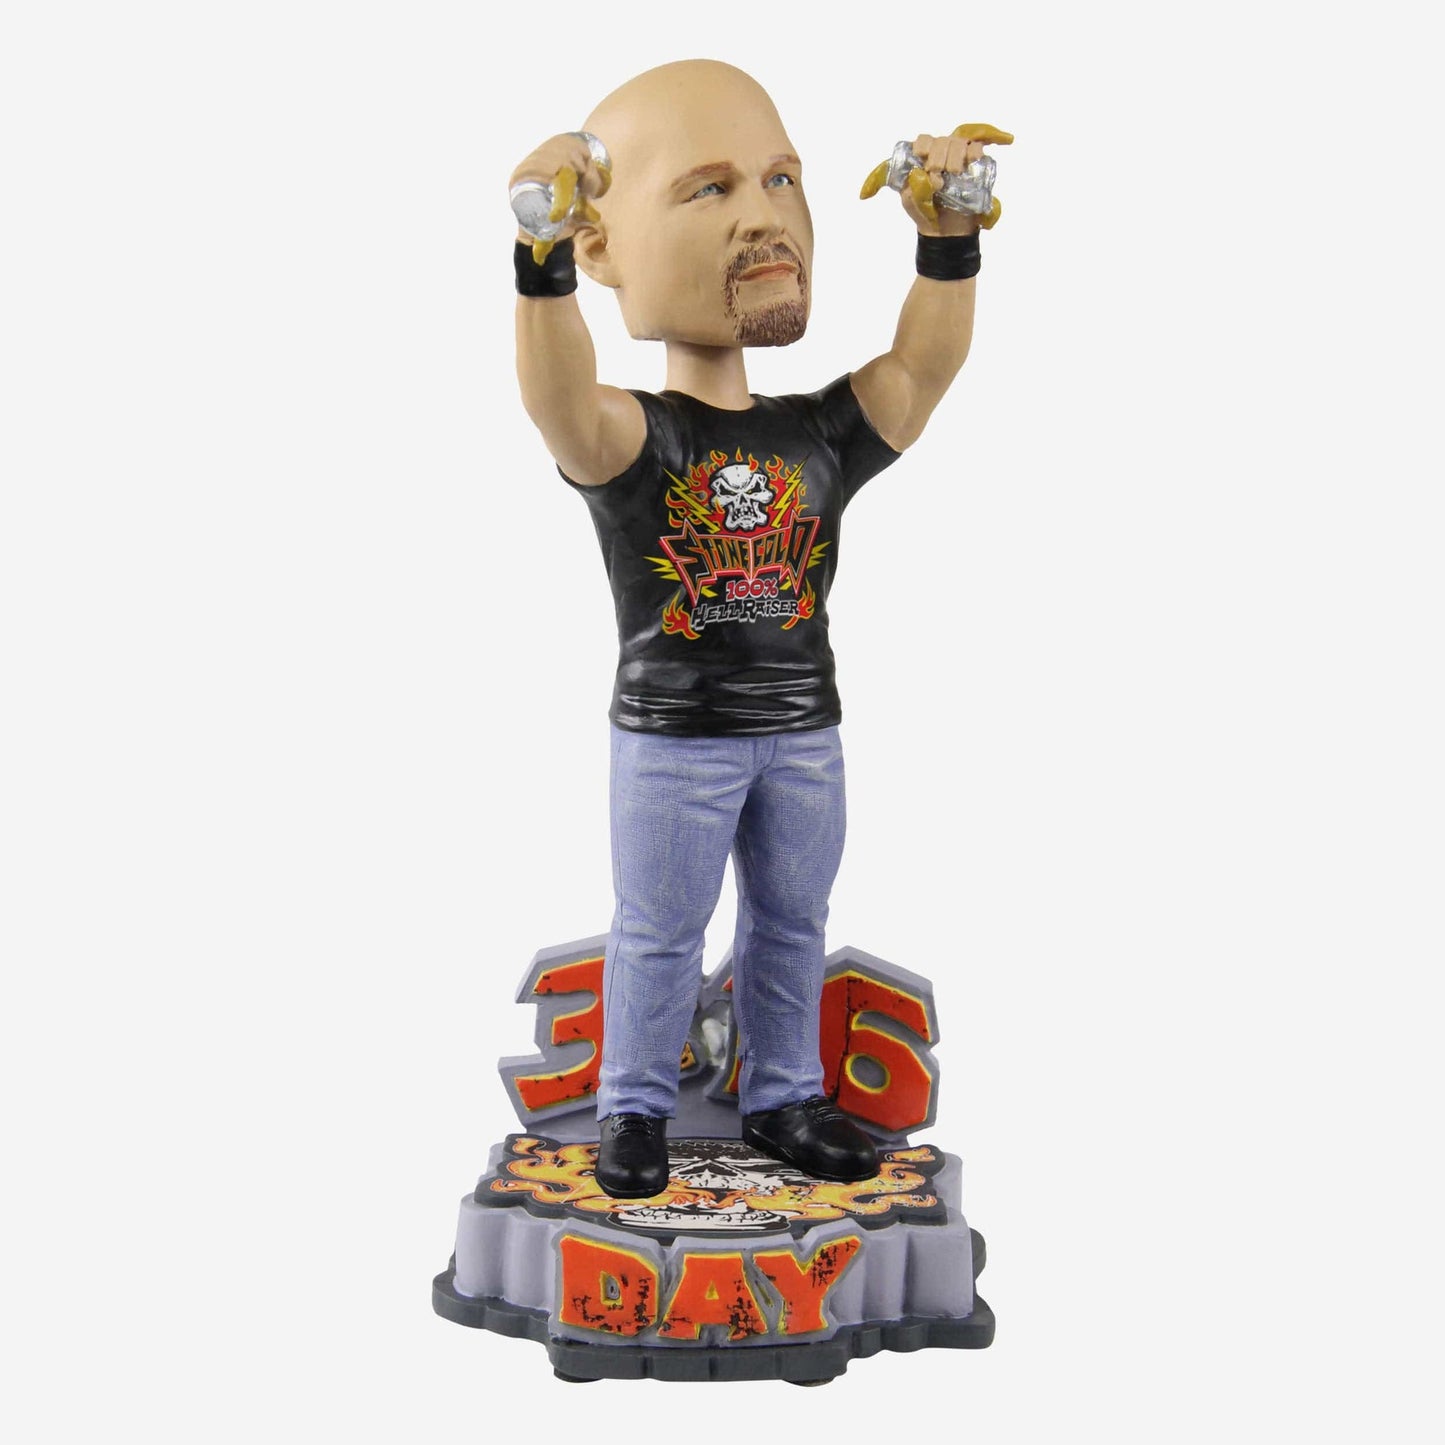 WWE FOCO Bobbleheads Limited Edition Stone Cold Steve Austin [3:16 Day Edition]